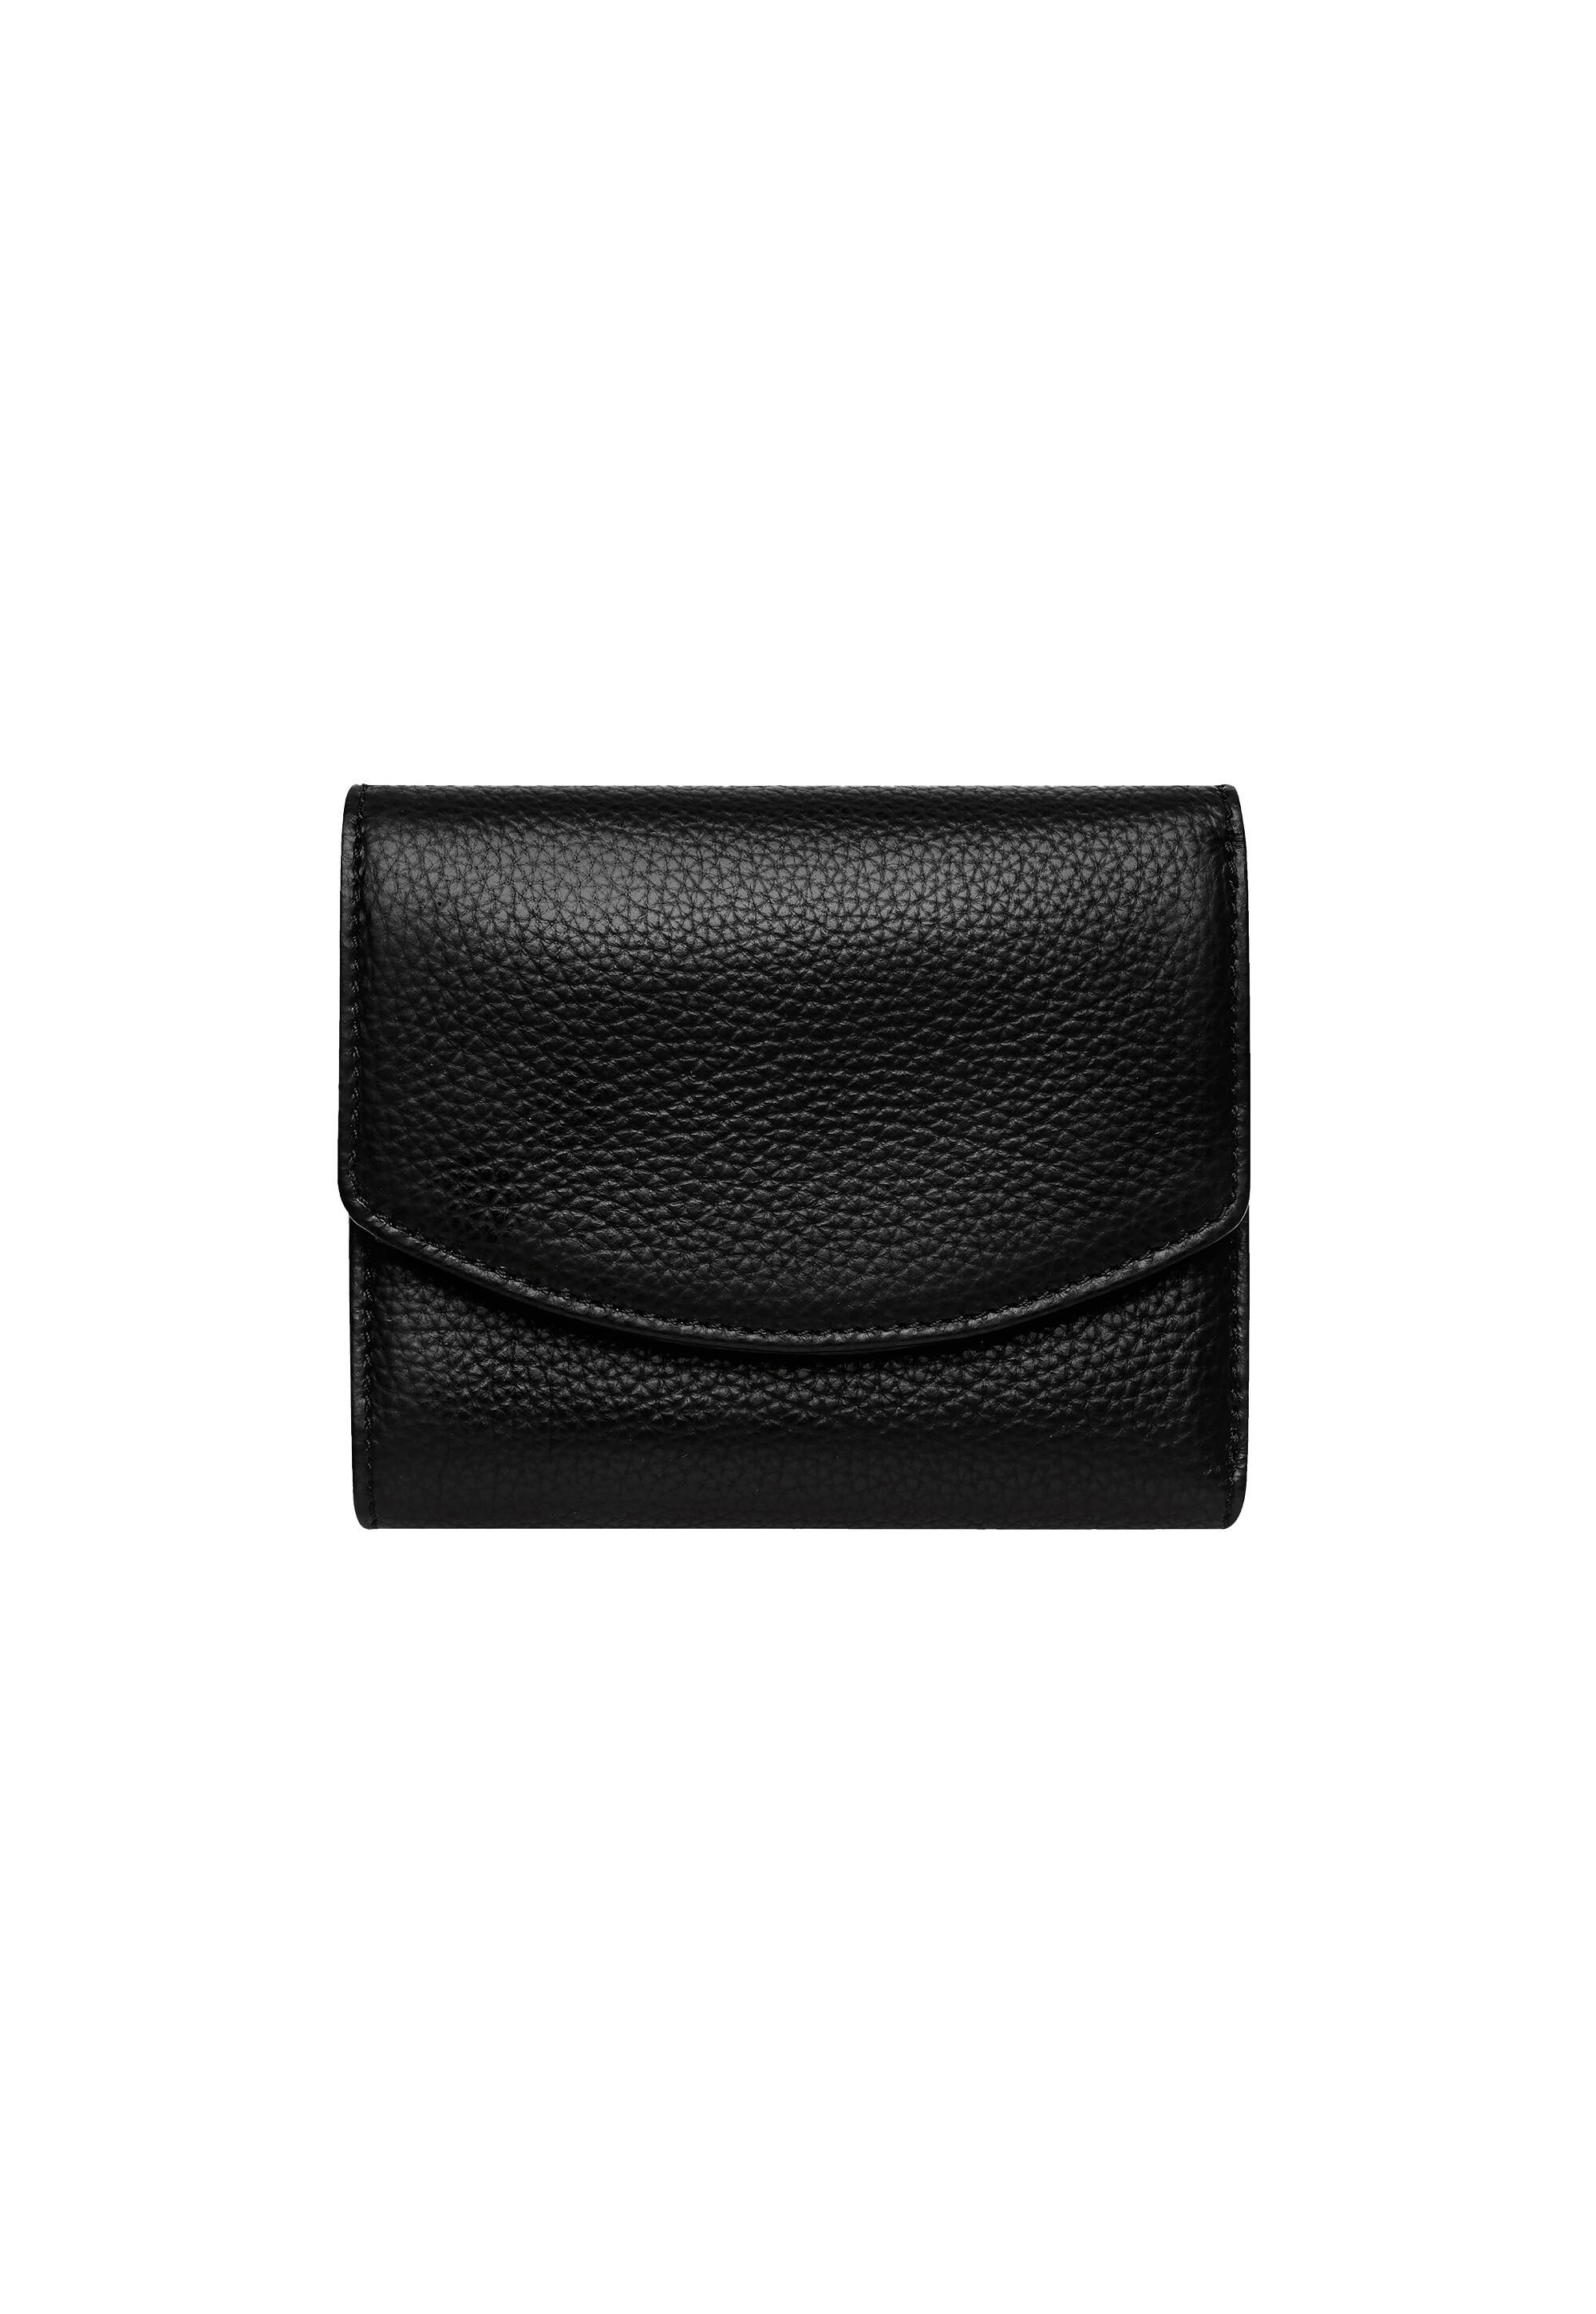 STATUS ANXIETY LUCKY SOMETIMES WALLET - Womens-Accessories : Soul